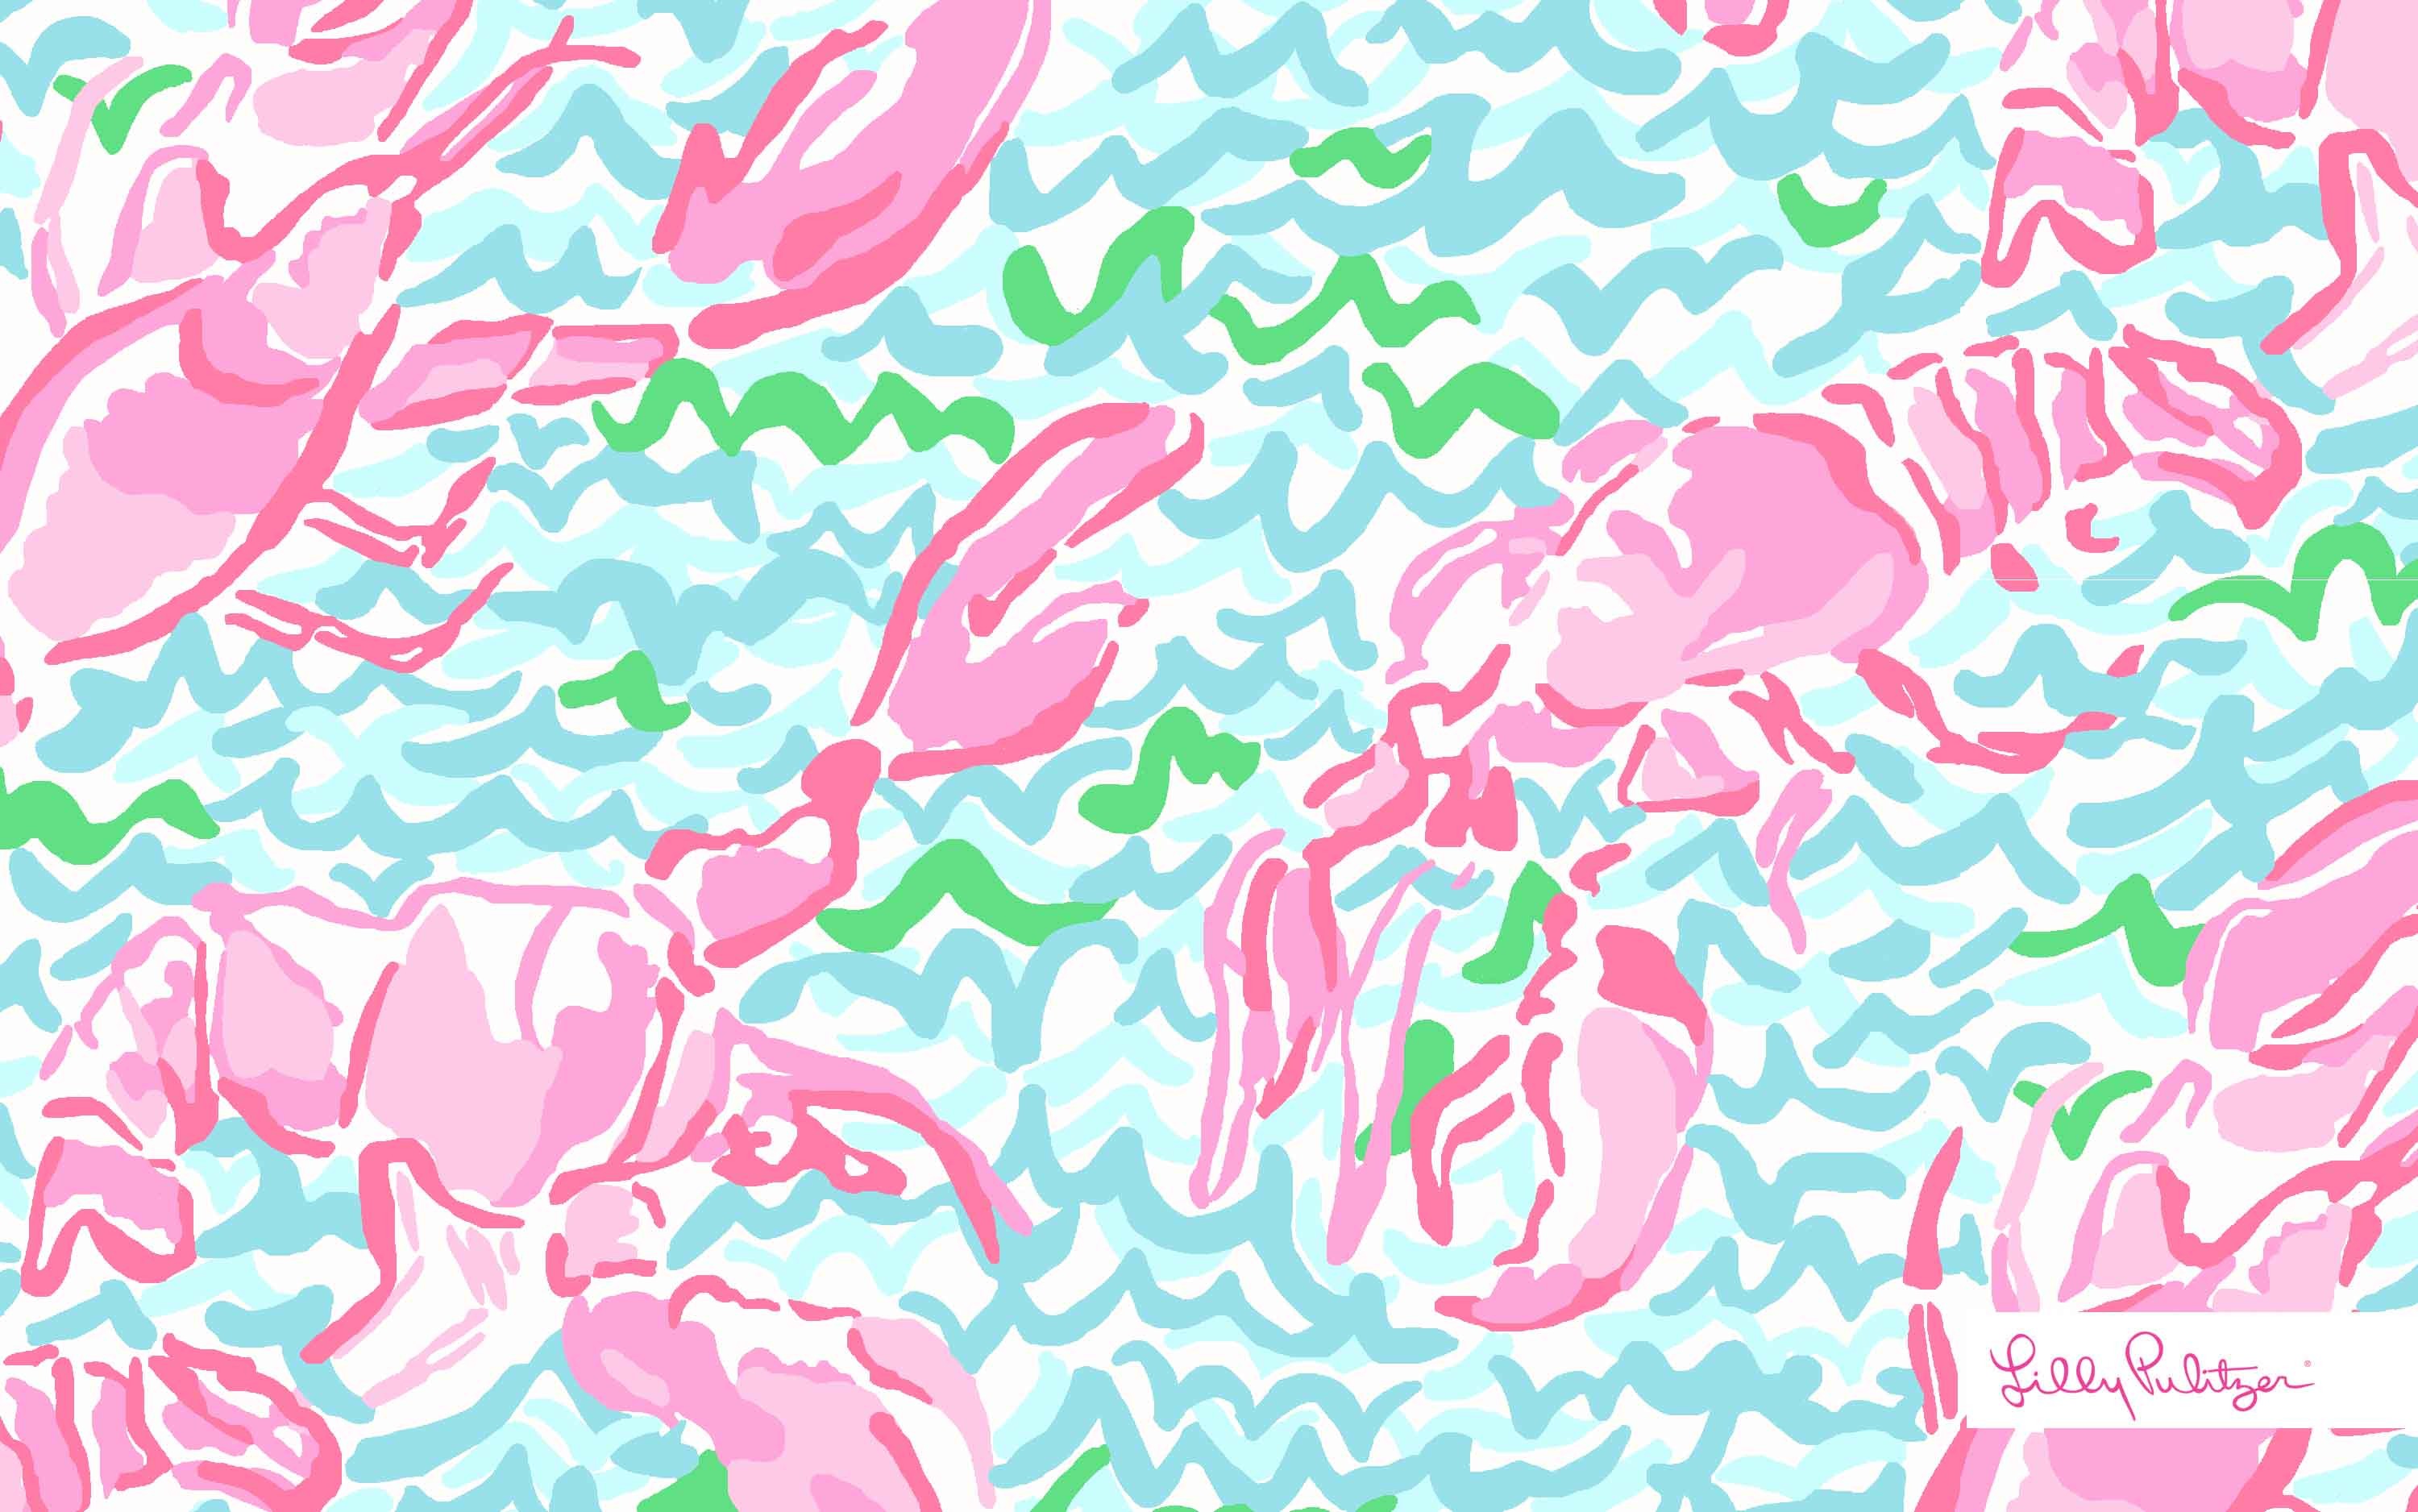 3000x1876 Displaying 20> Images For - Lilly Pulitzer Anchor Wallpaper.